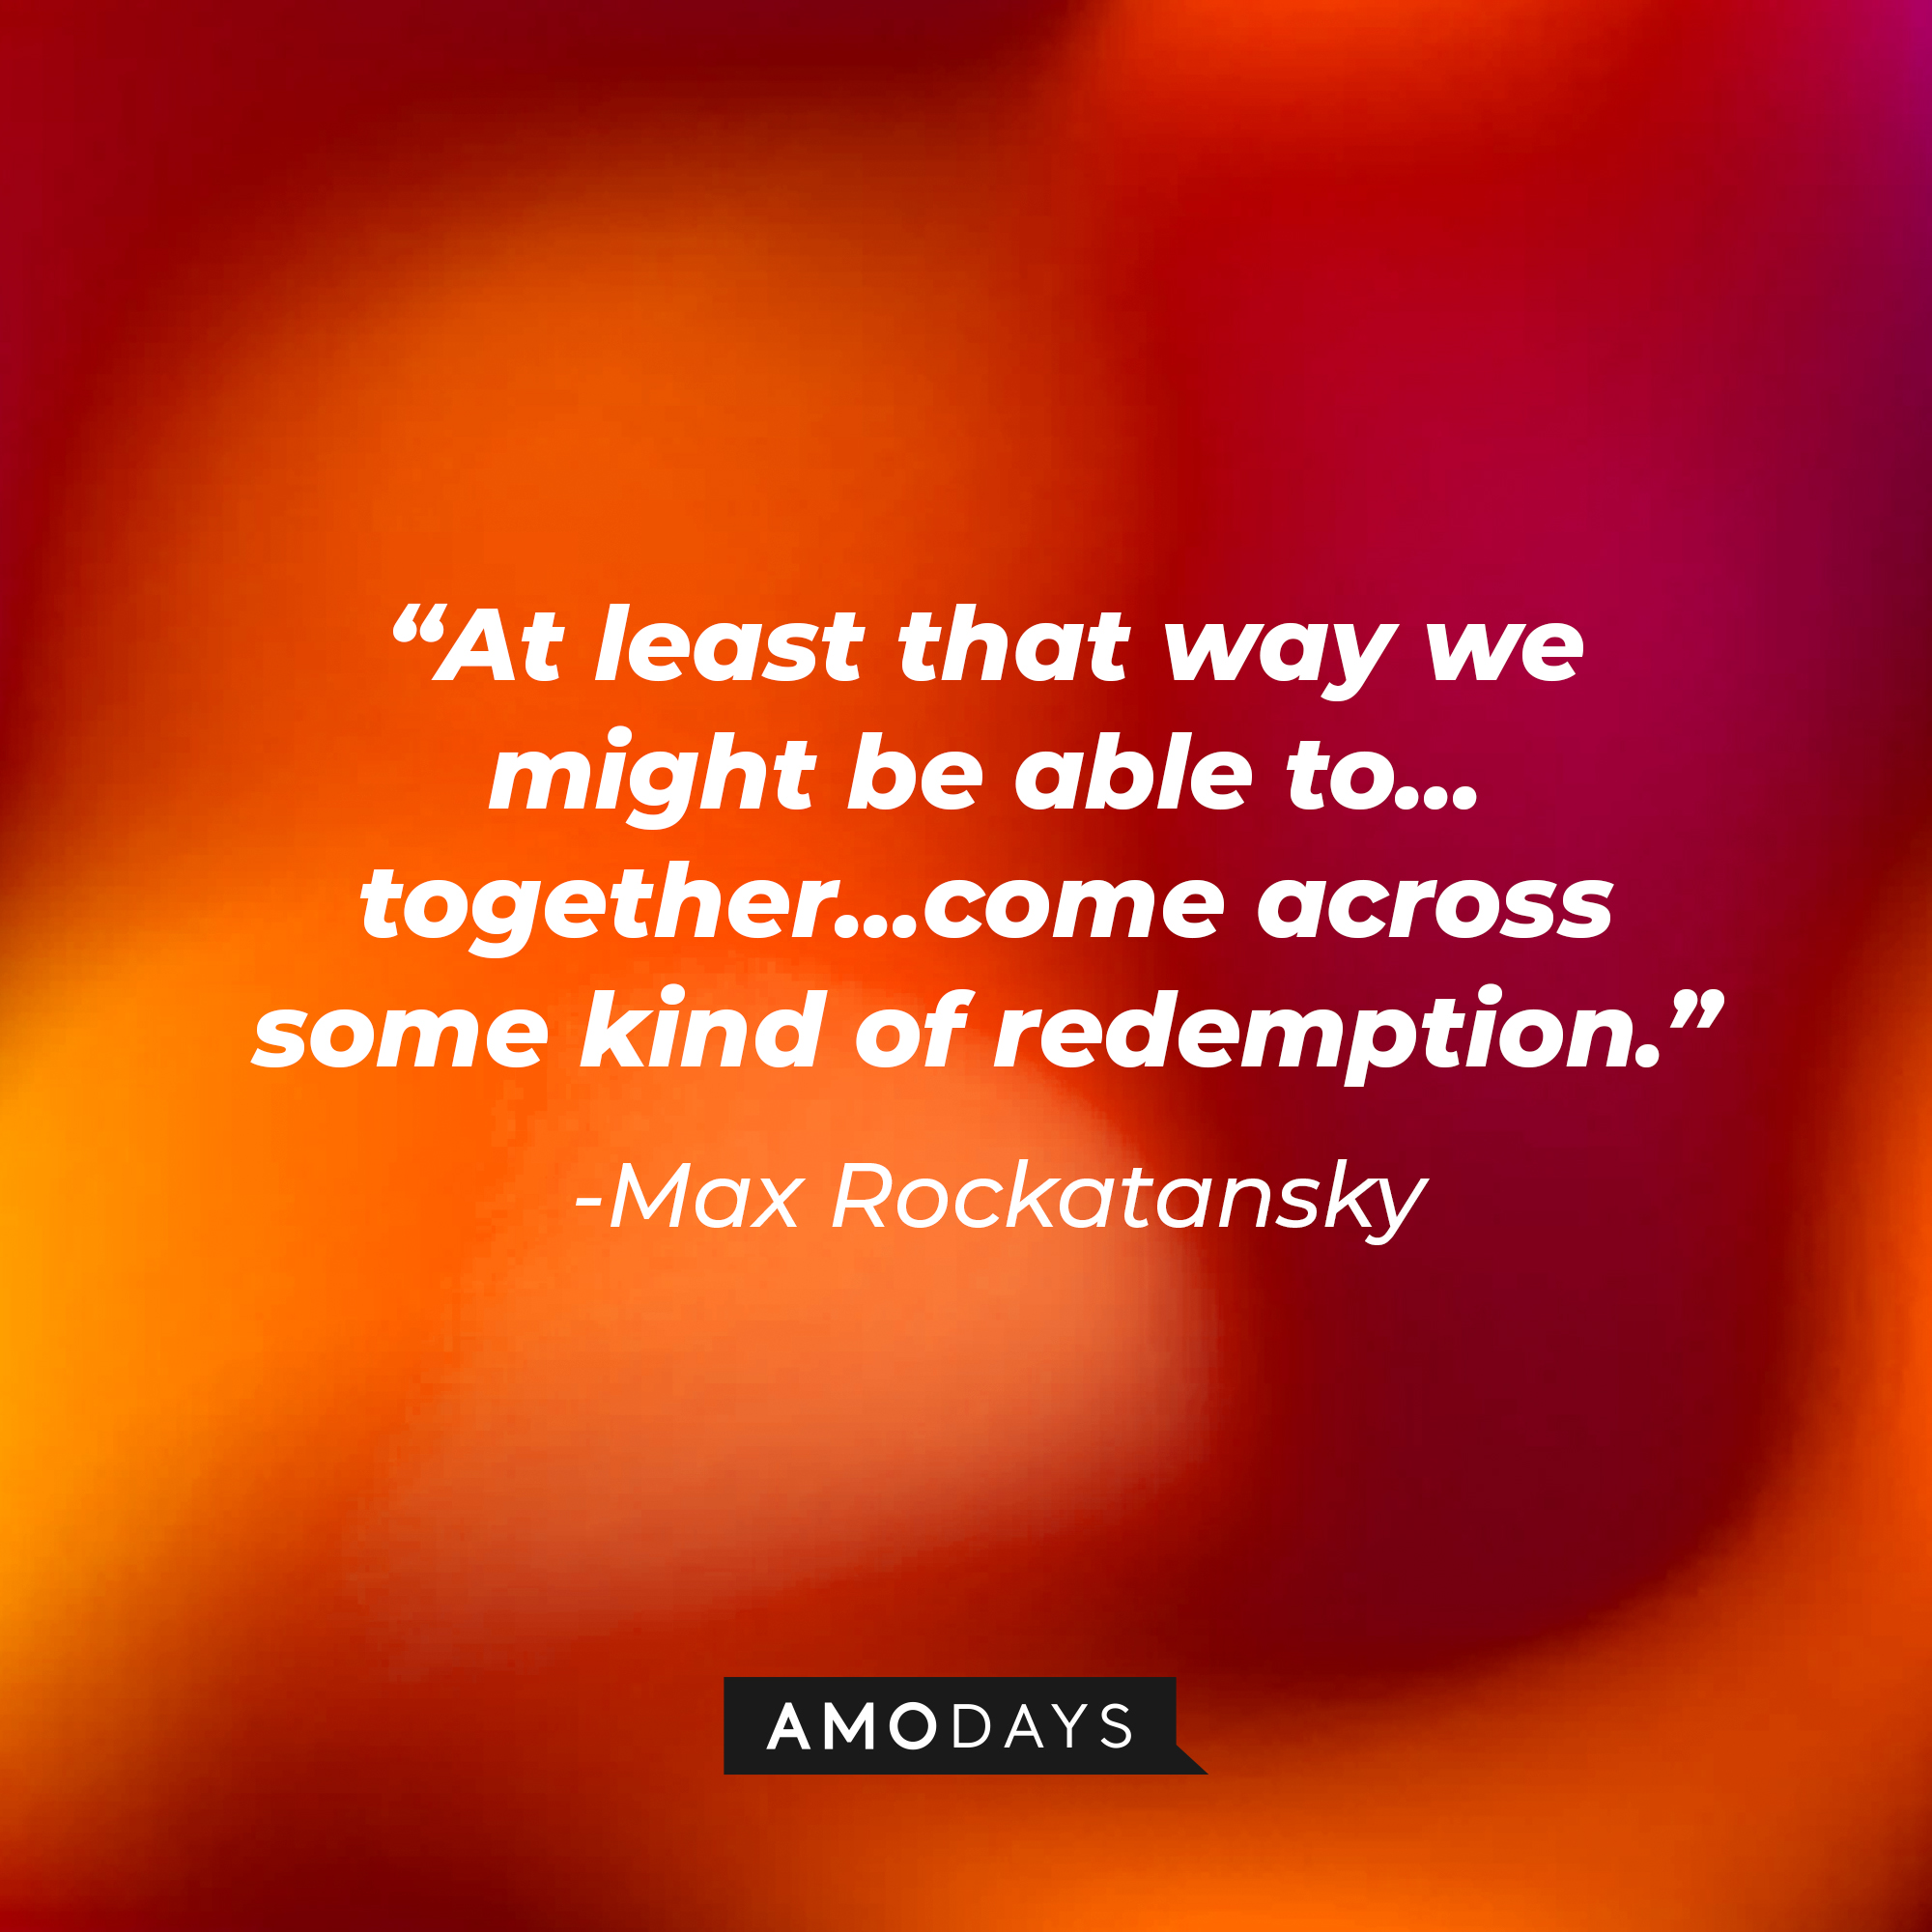 Max Rockatansky’s quote: "At least that way we might be able to... together... come across some kind of redemption." | Source: AmoDays